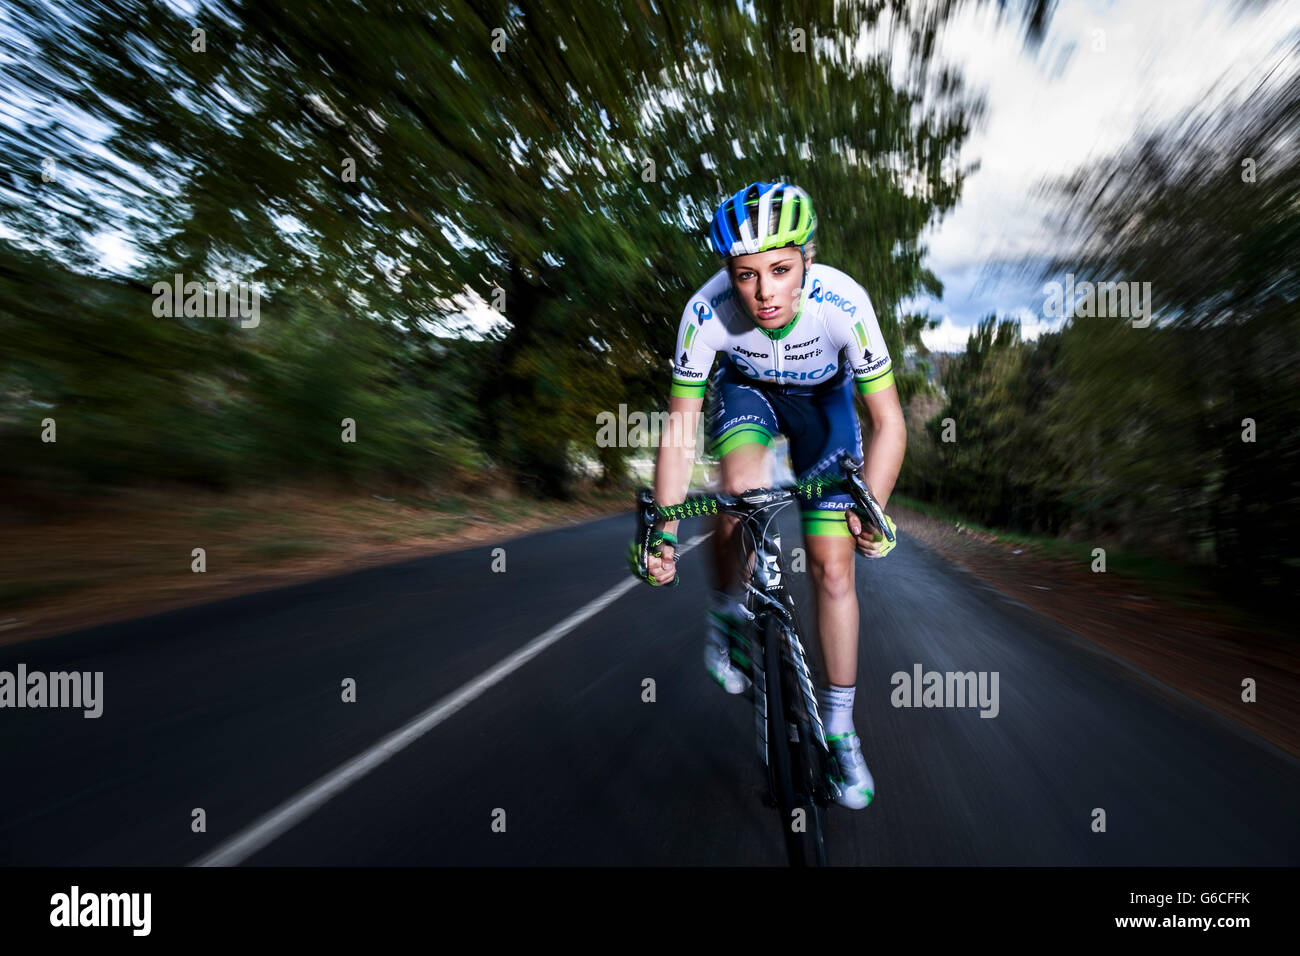 Tasmanian champion cyclist Macey Stewart out on a training ride on the country roads behind Sheffield near Mount Roland,North West Tasmania. Stock Photo